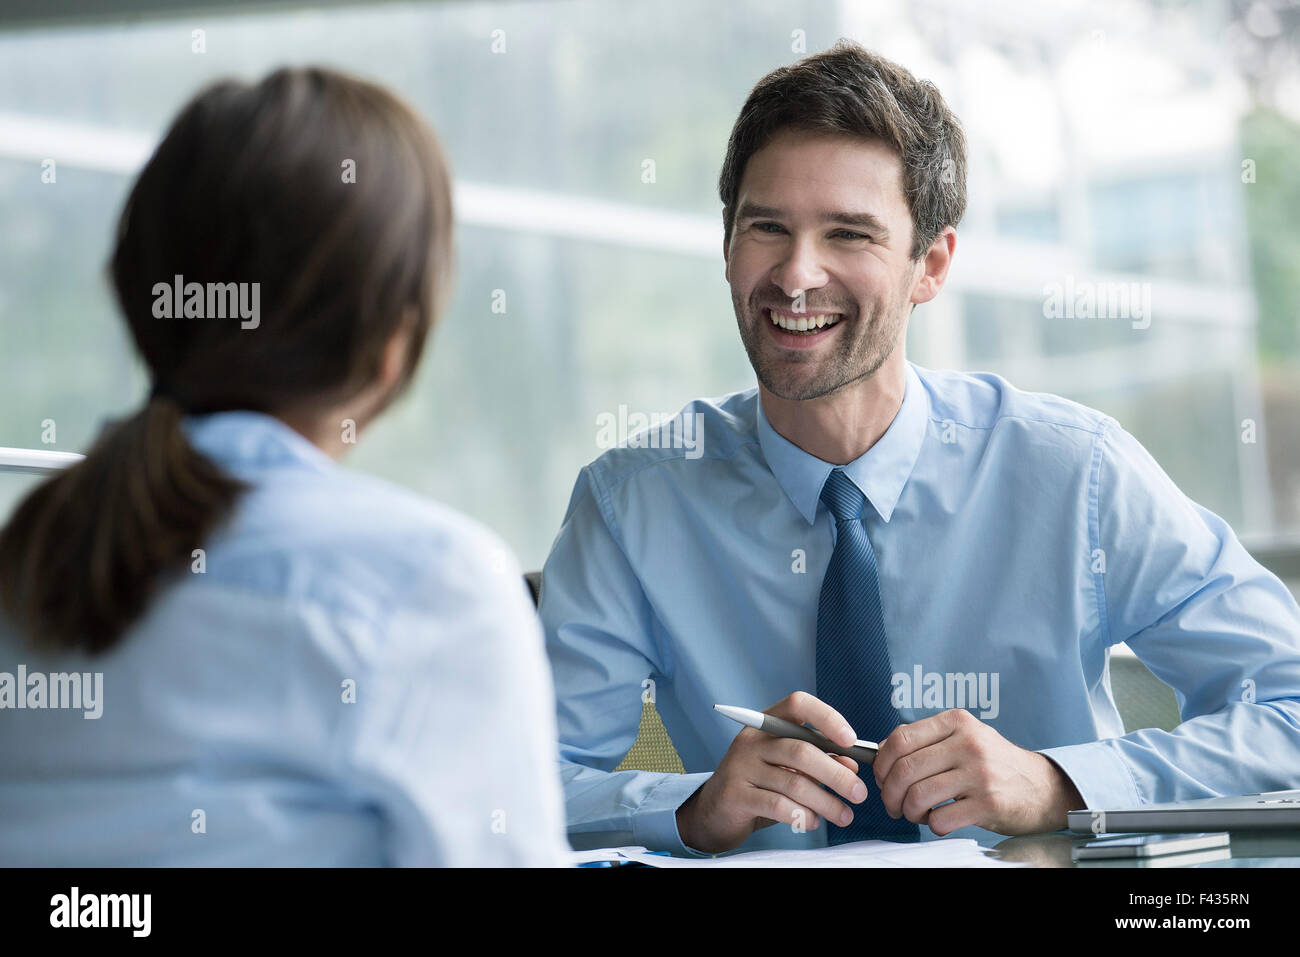 Manager interviewing job candidate Stock Photo